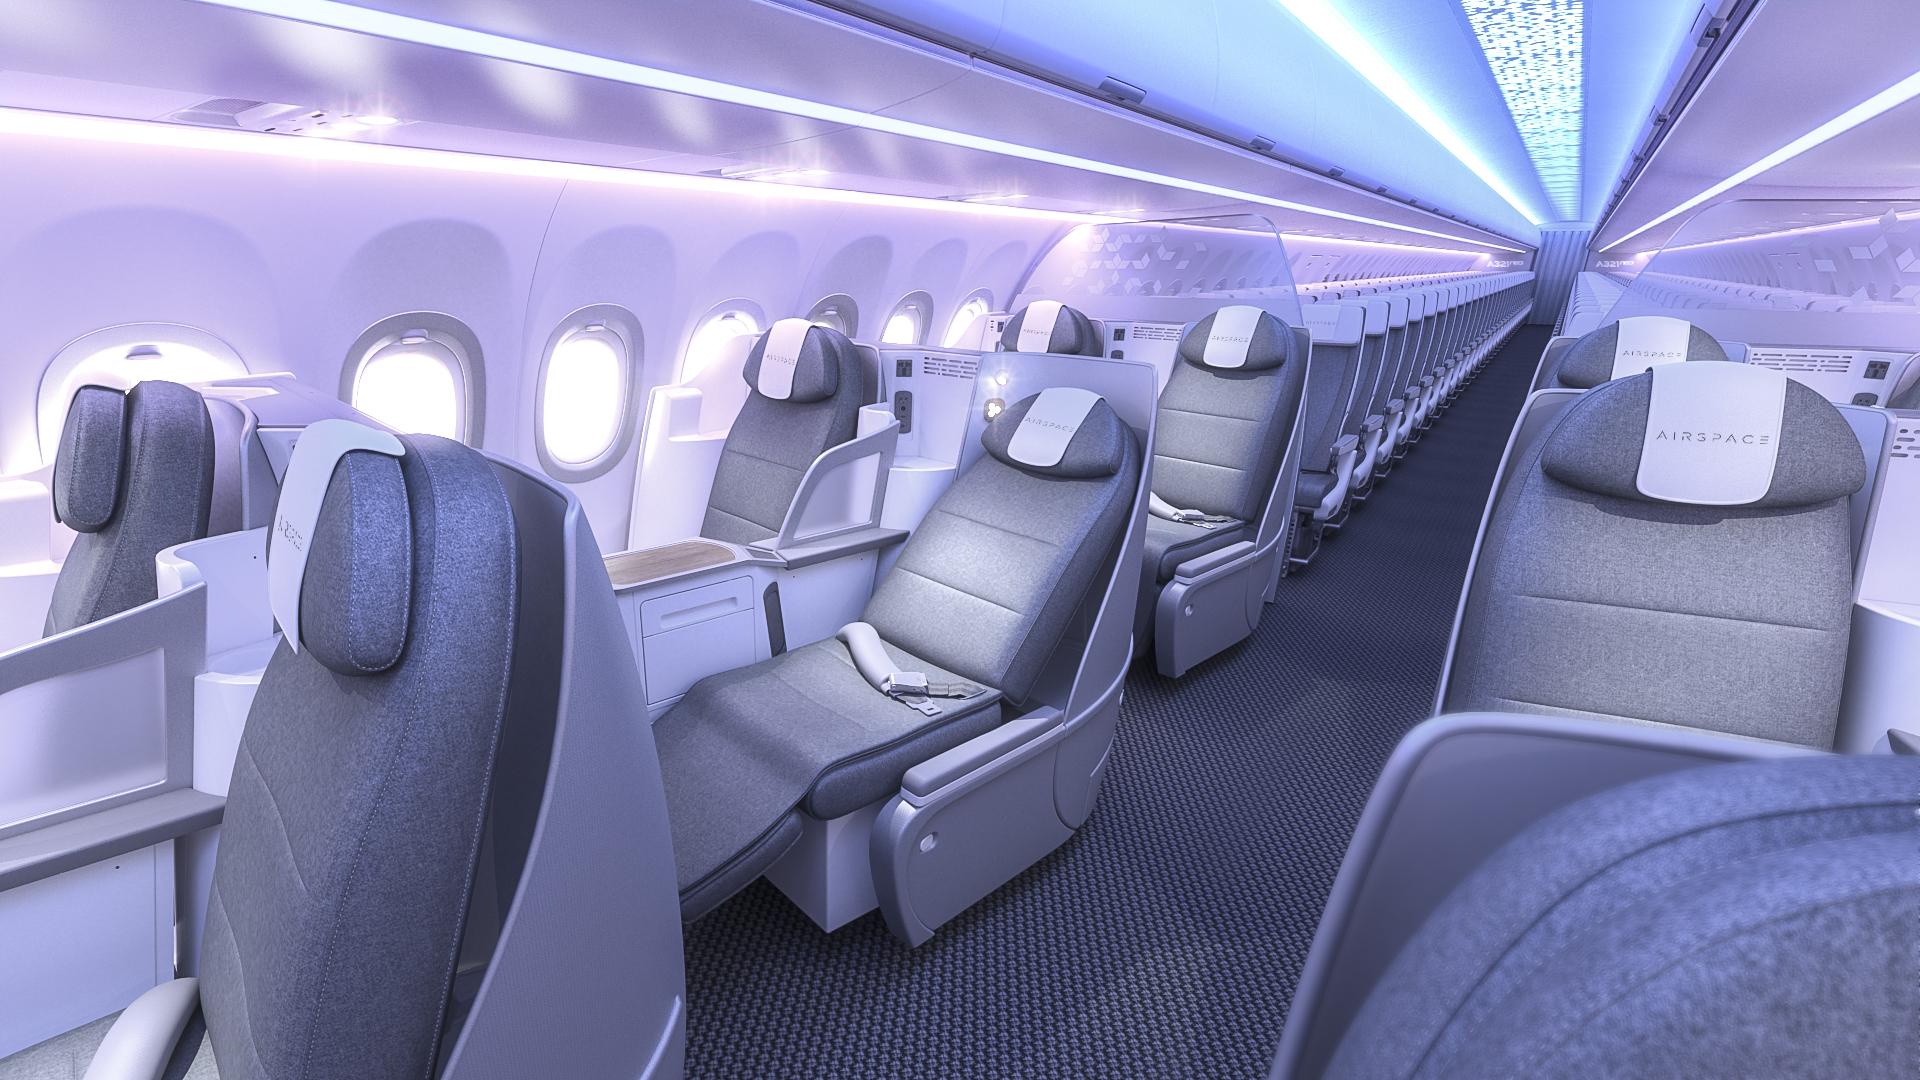 Cabin Interiors: Flying In The COVID-19 Era | Aviation Week Network